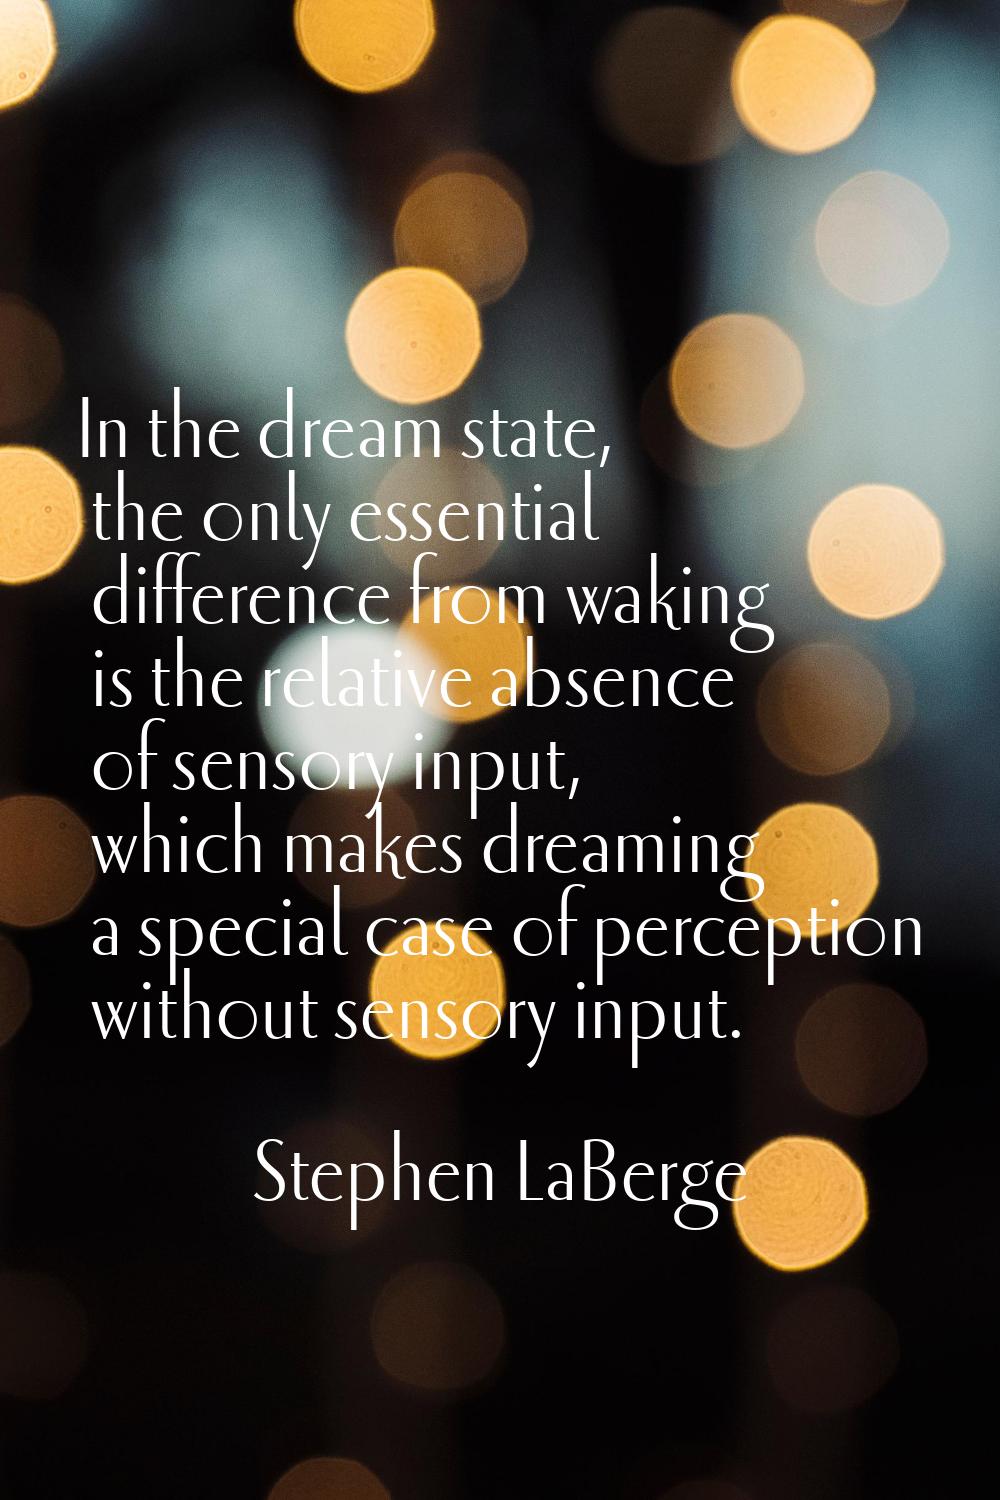 In the dream state, the only essential difference from waking is the relative absence of sensory in